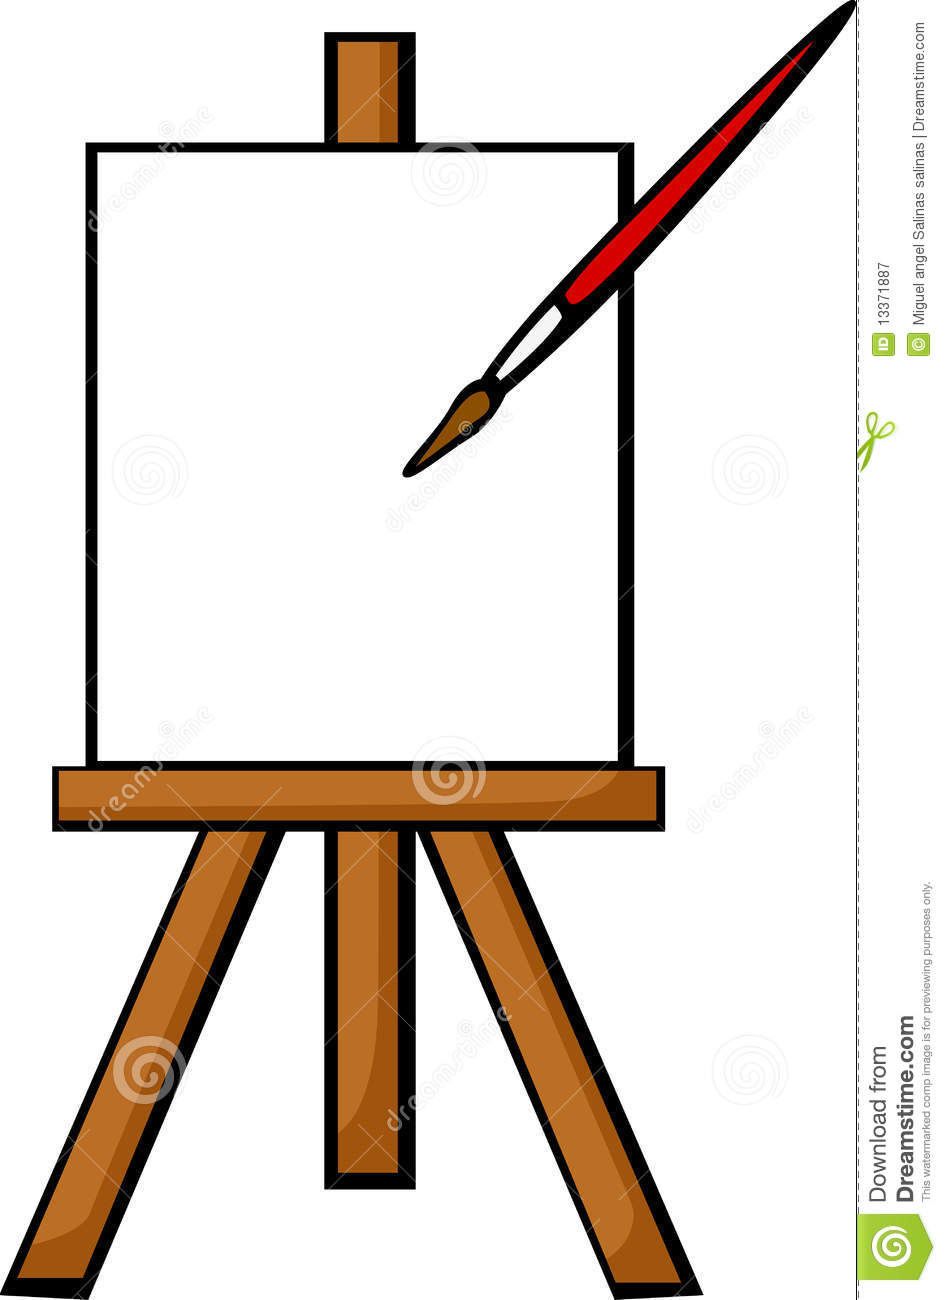 Illustration Of A Blank Canvas In An Easel With A Painting Brush